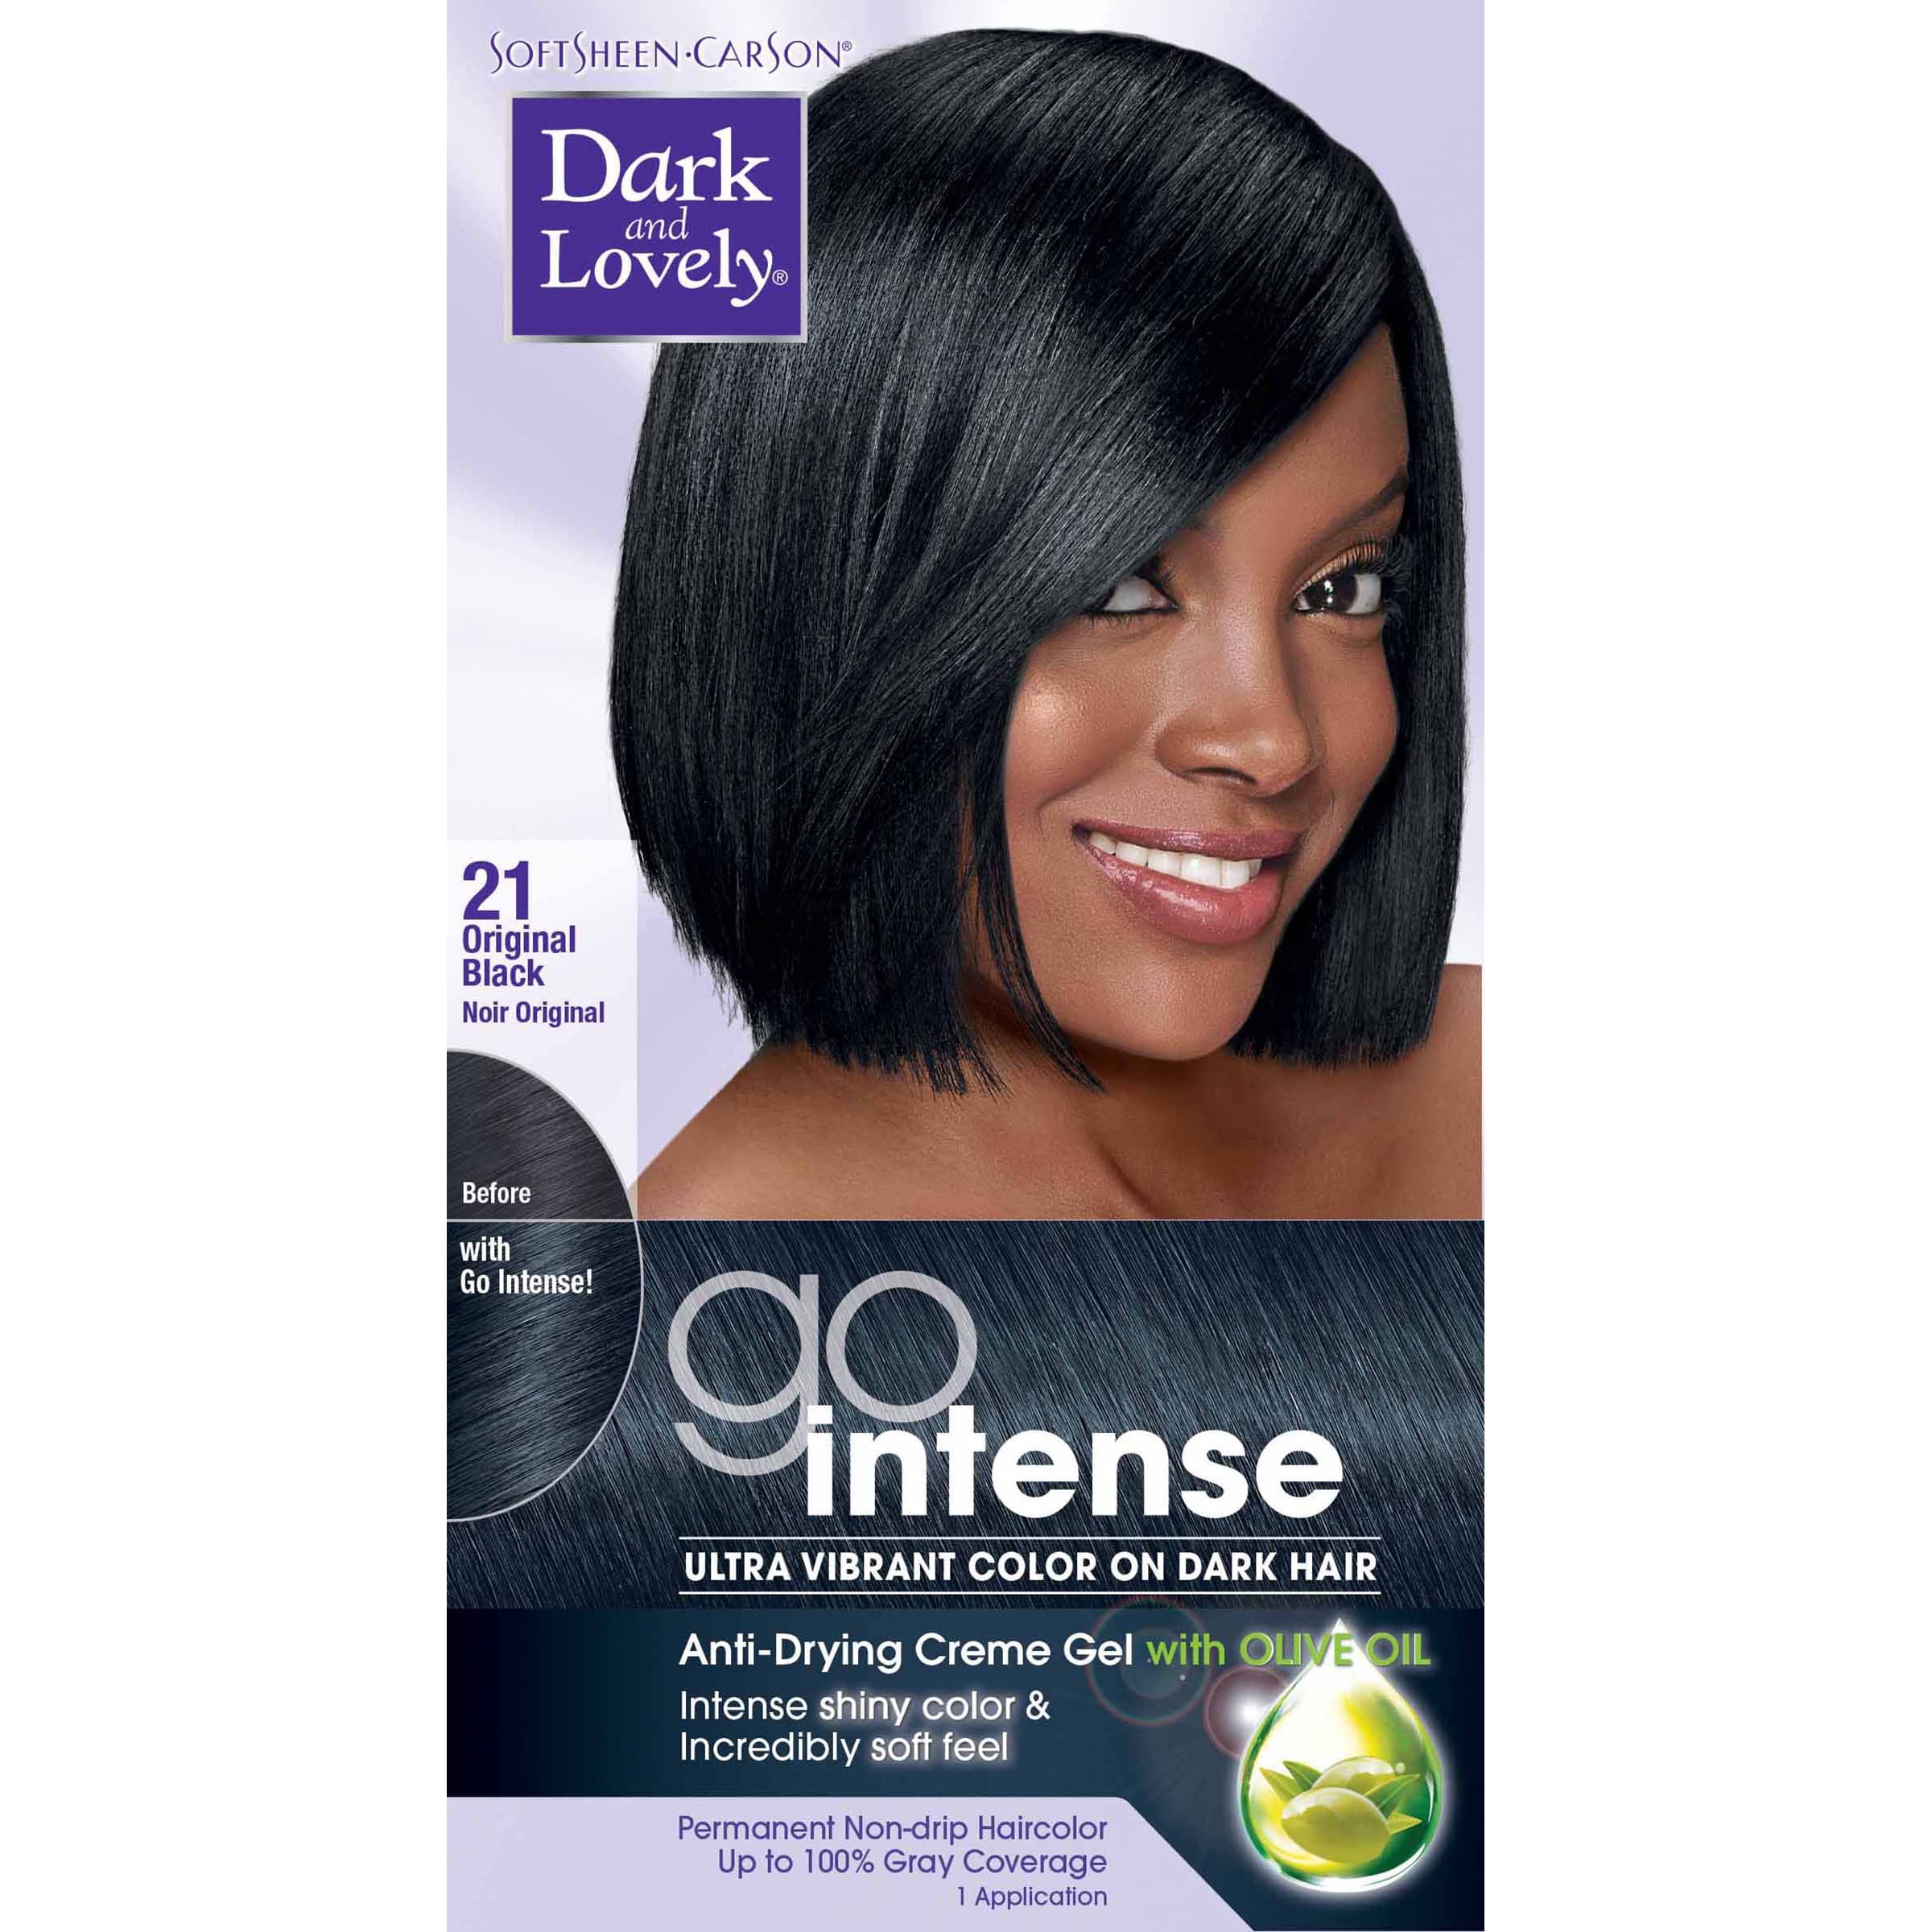 SoftSheen-Carson Dark and Lovely Go Intense Ultra Vibrant Hair Color on